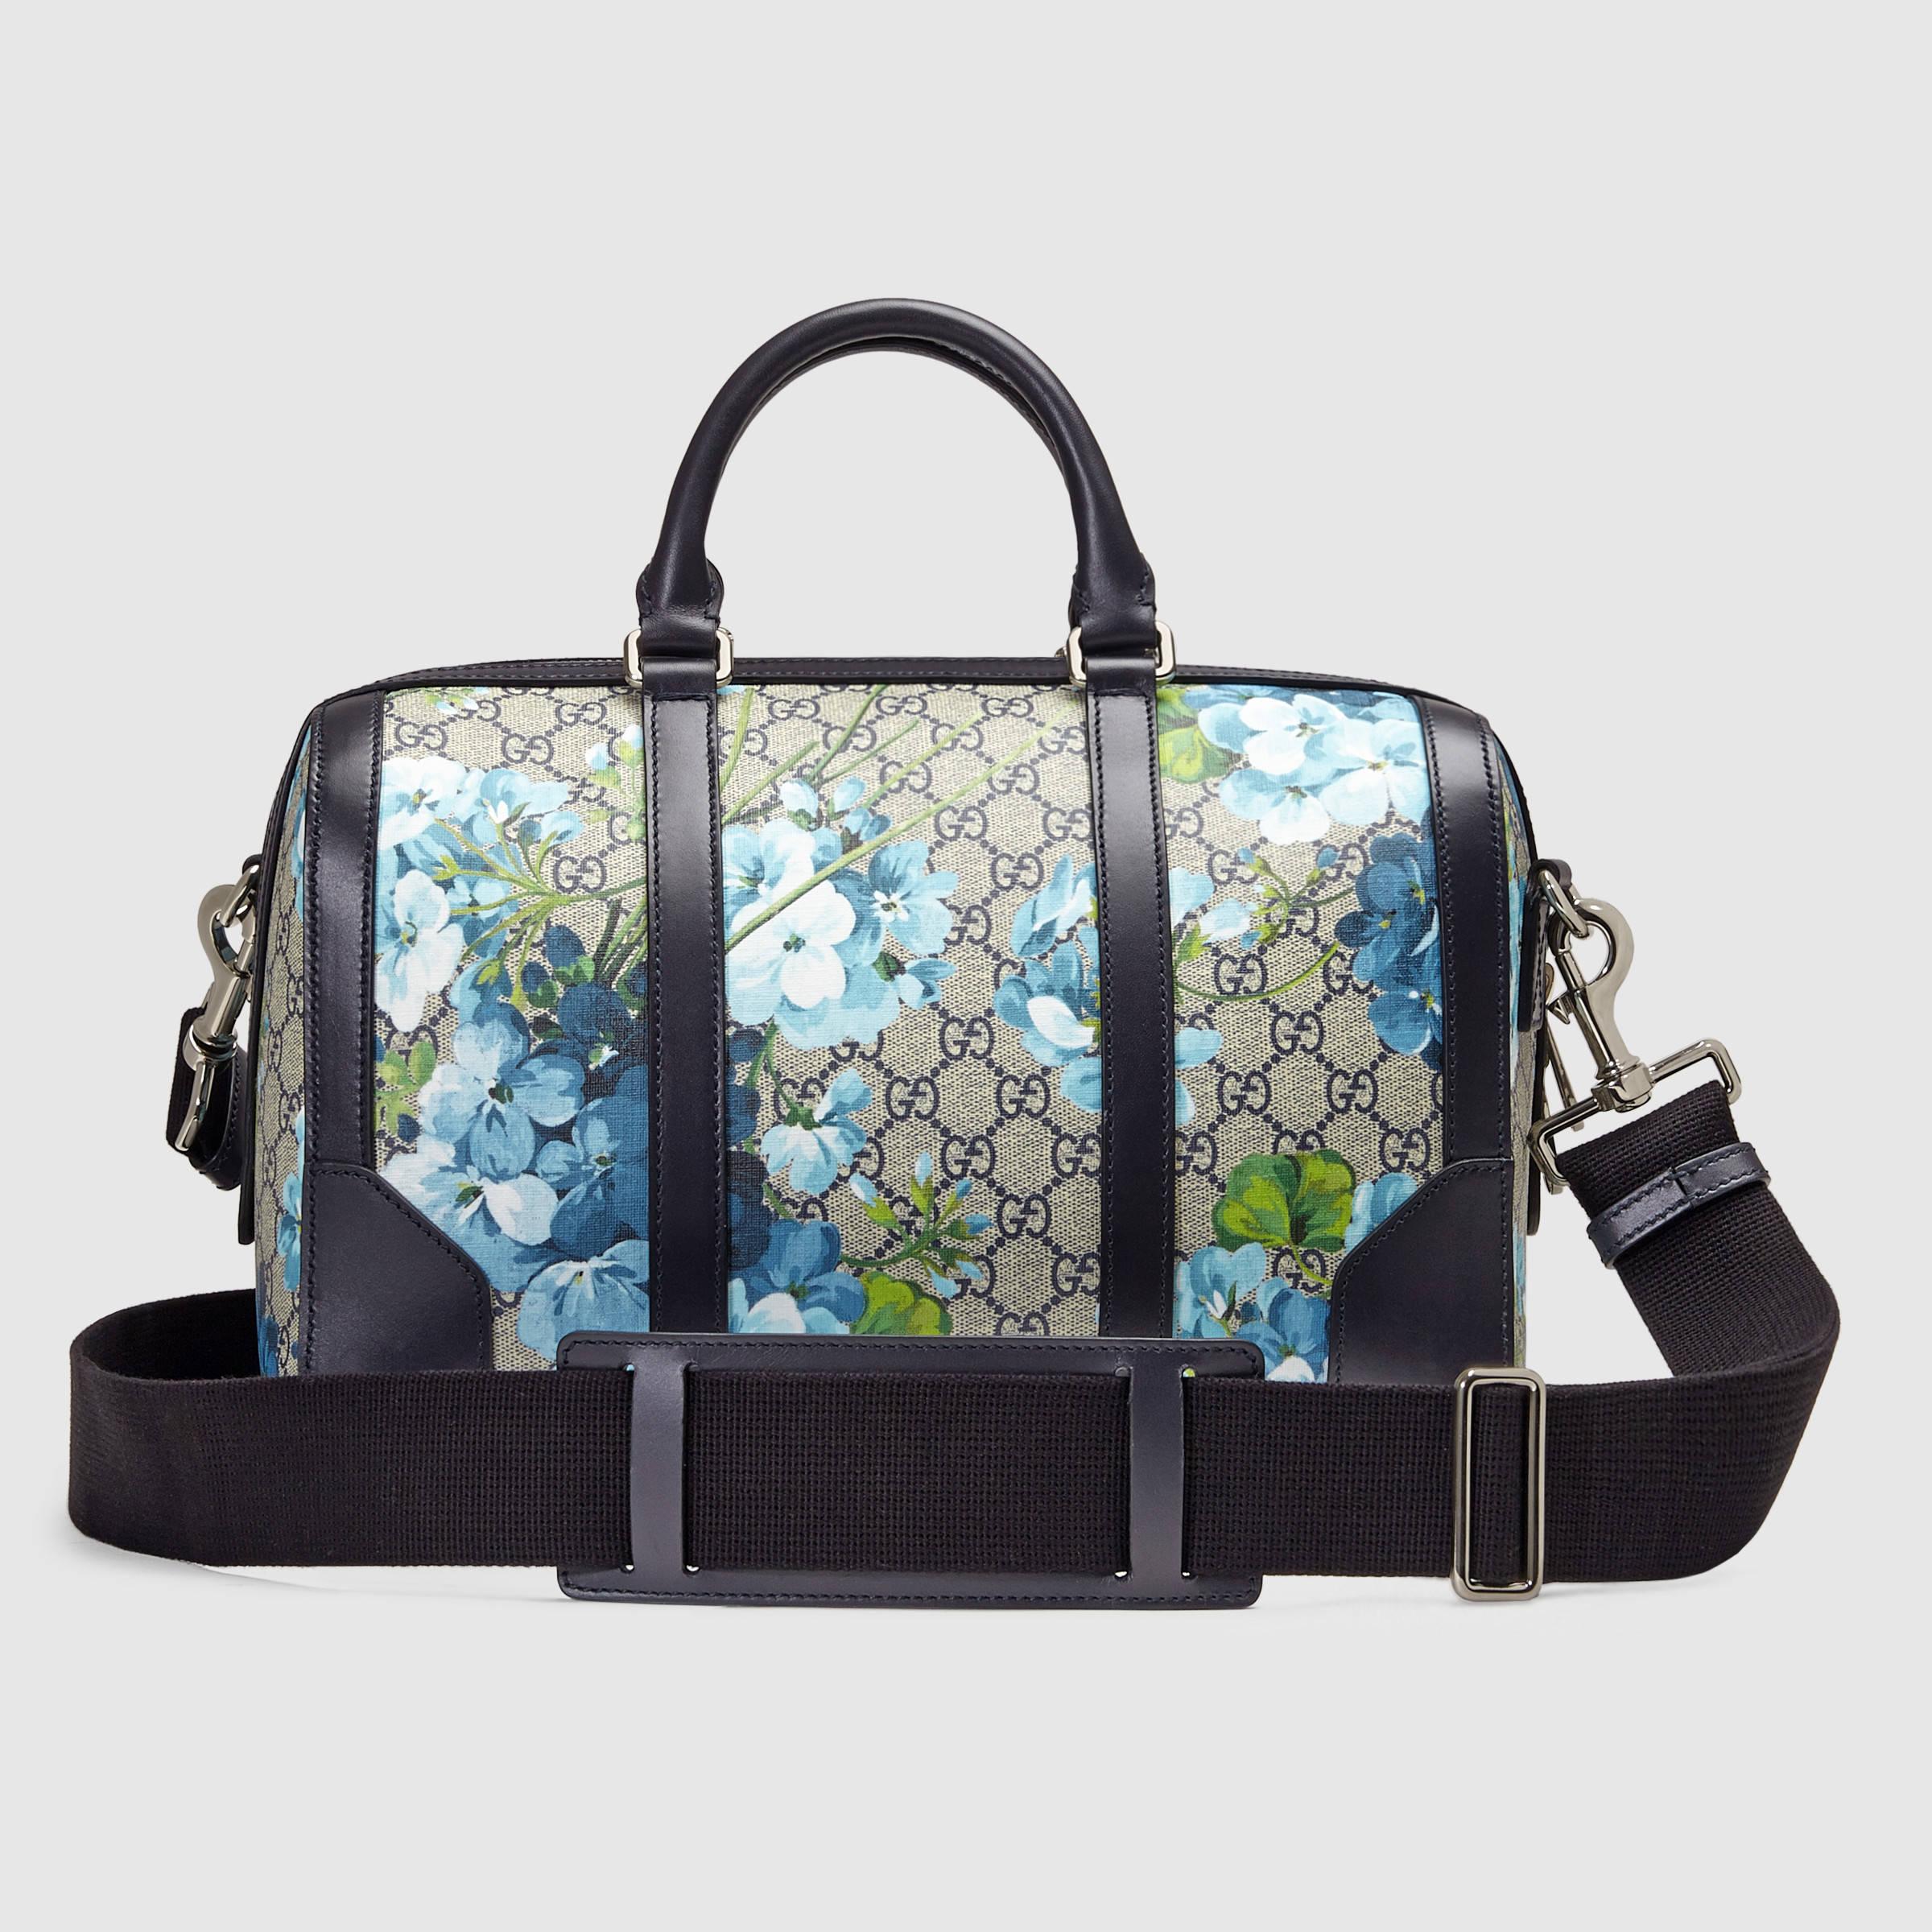 Lyst - Gucci GG Blooms Canvas Duffle Bag in Blue